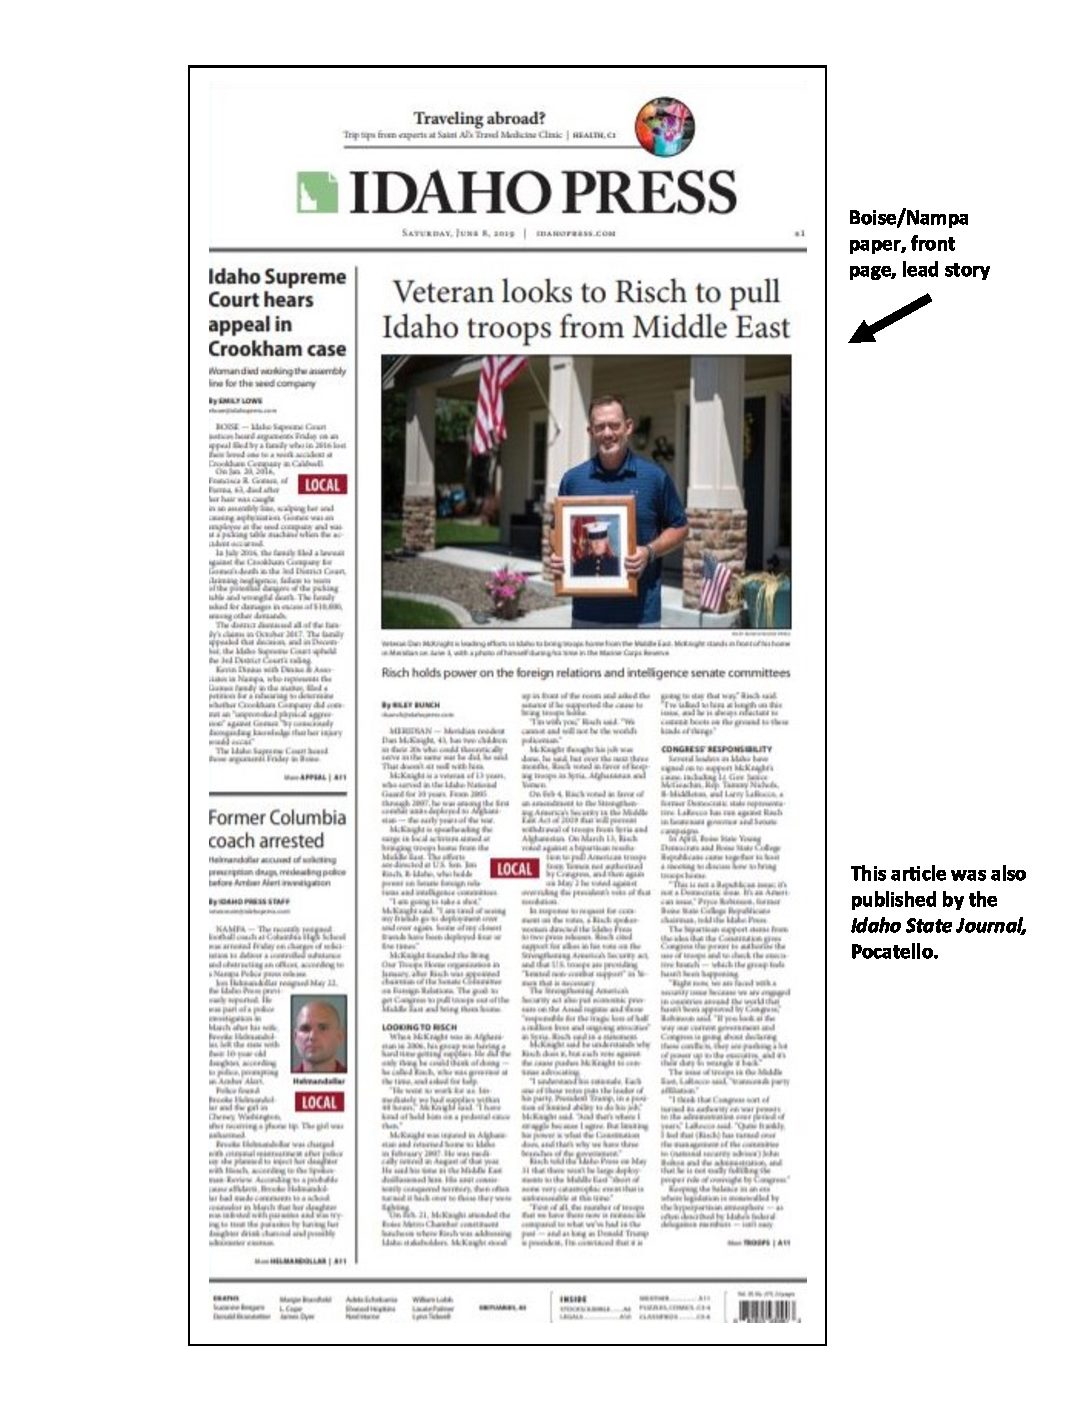 Idaho Press front page – Veteran looks to Risch to pull Idaho troops from Middle East